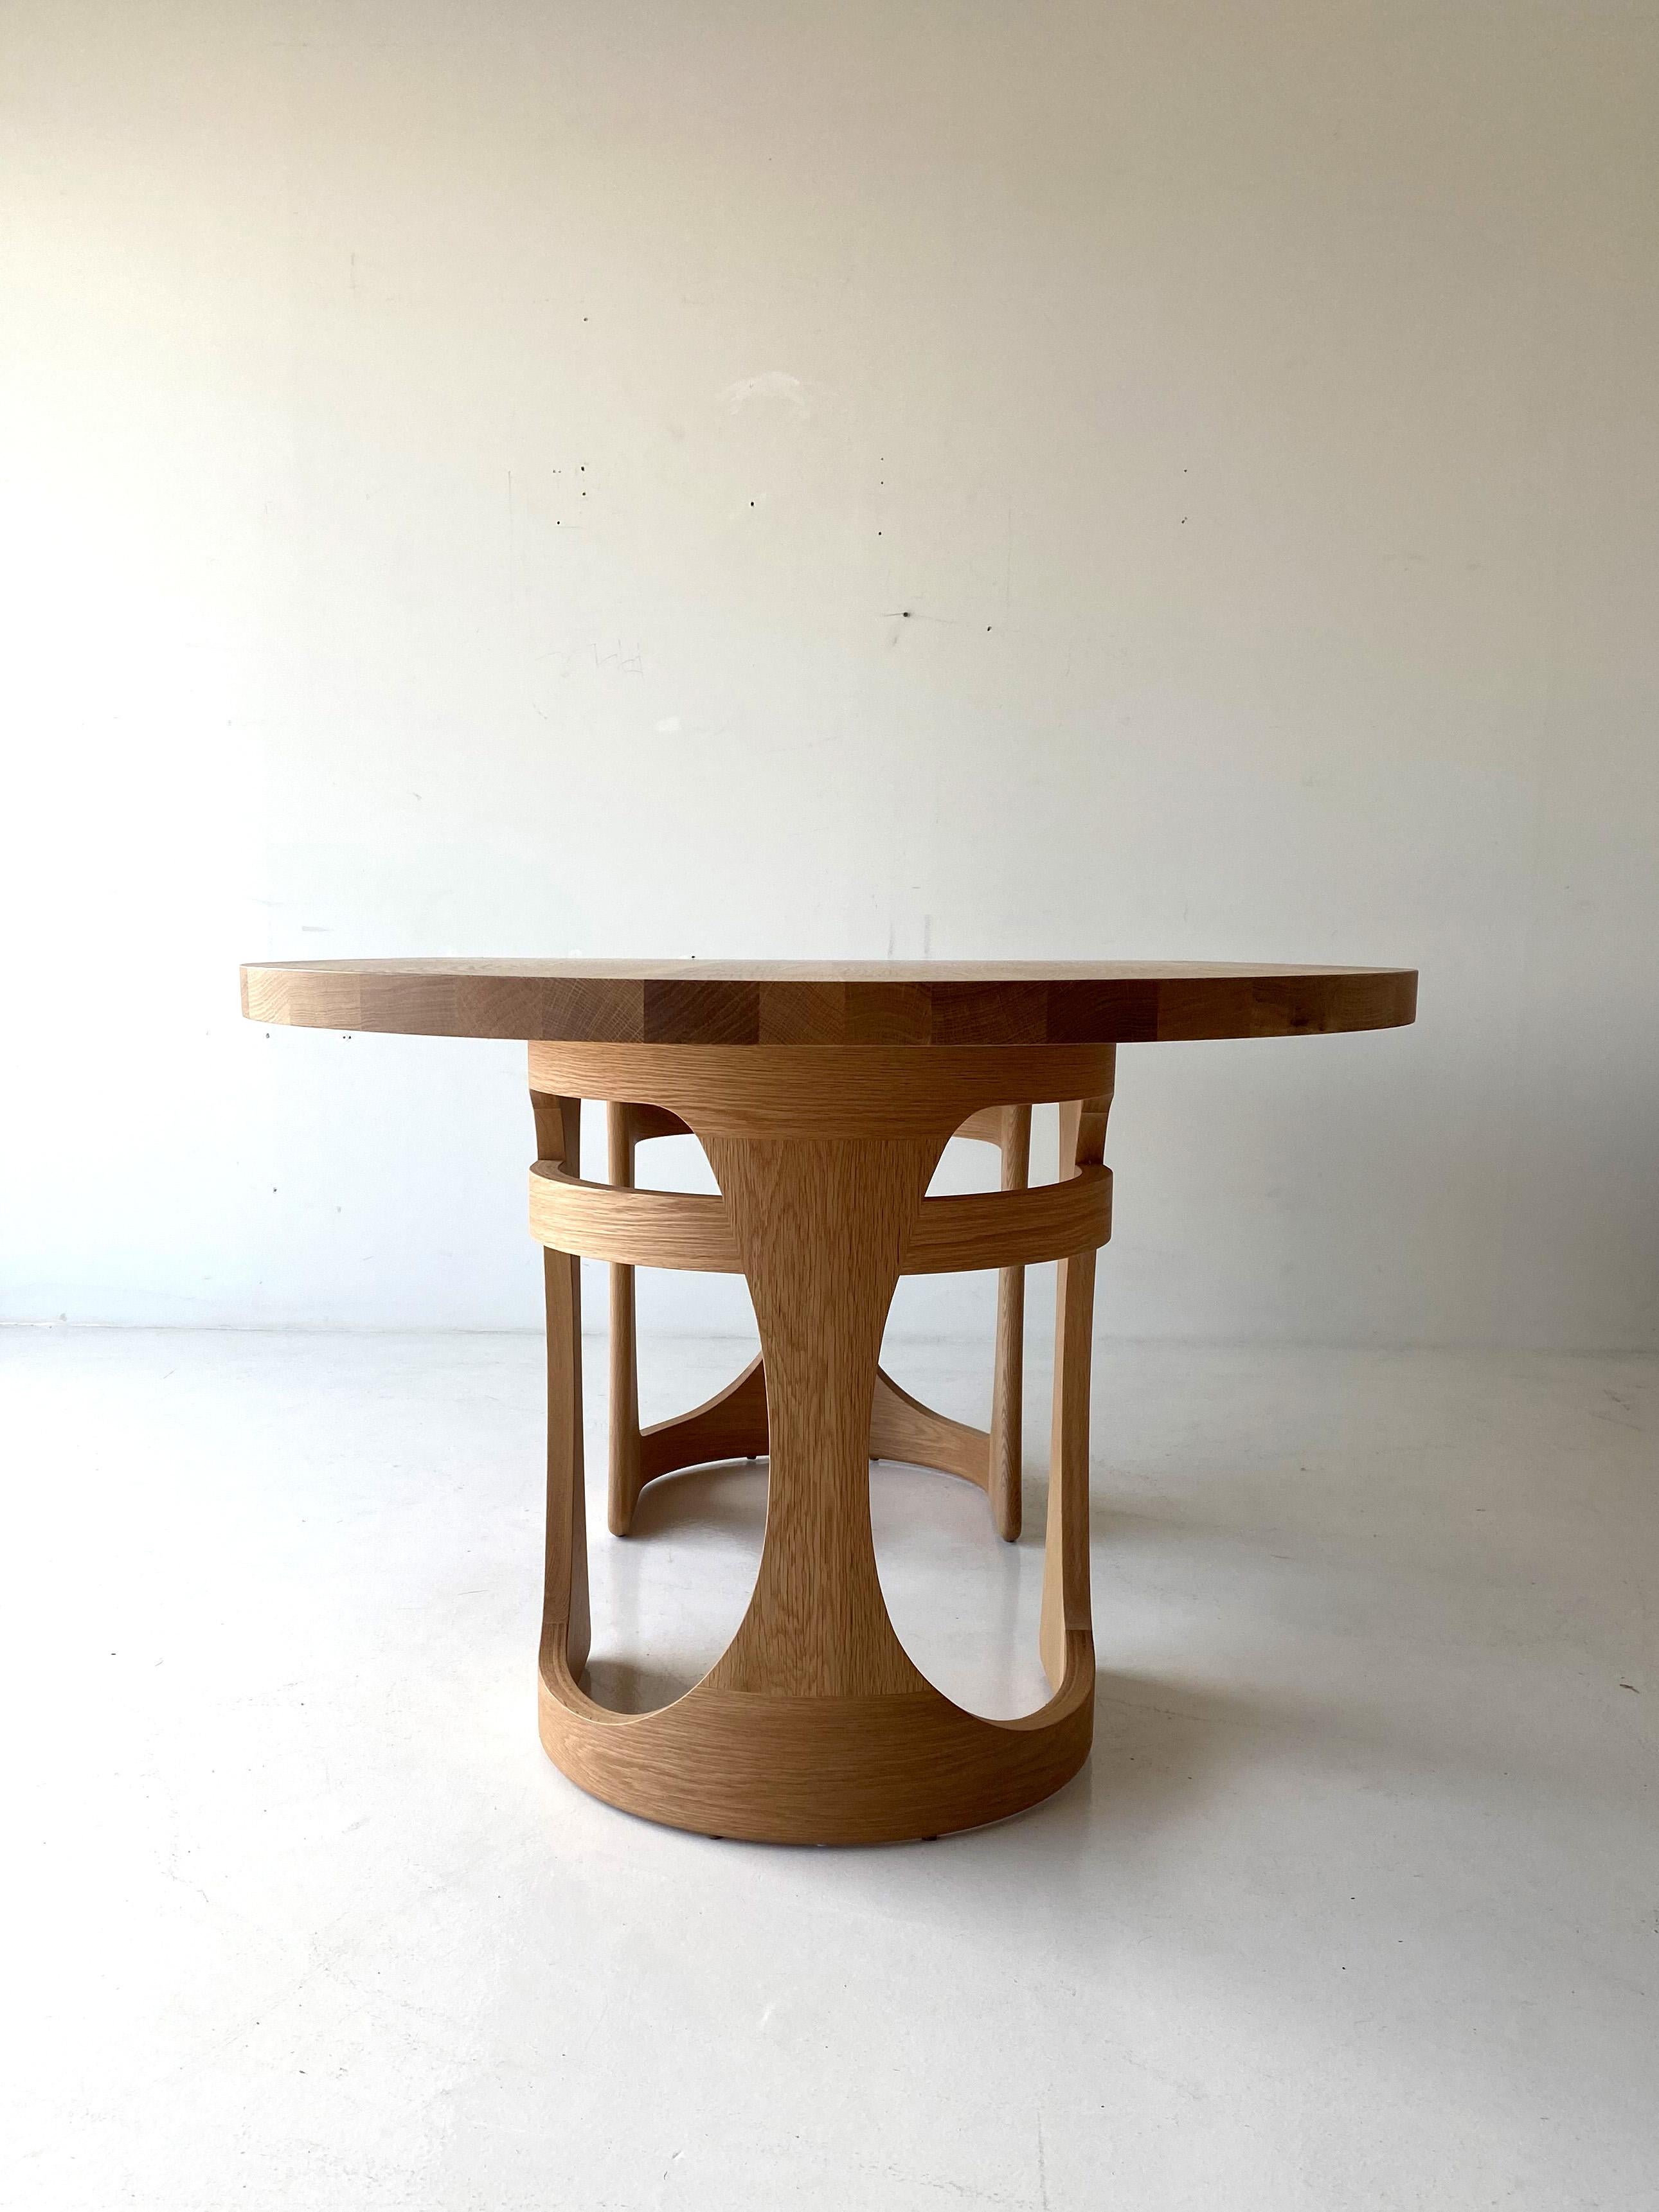 Modern Oak Dining Table Barricas Series In New Condition For Sale In Oak Harbor, OH